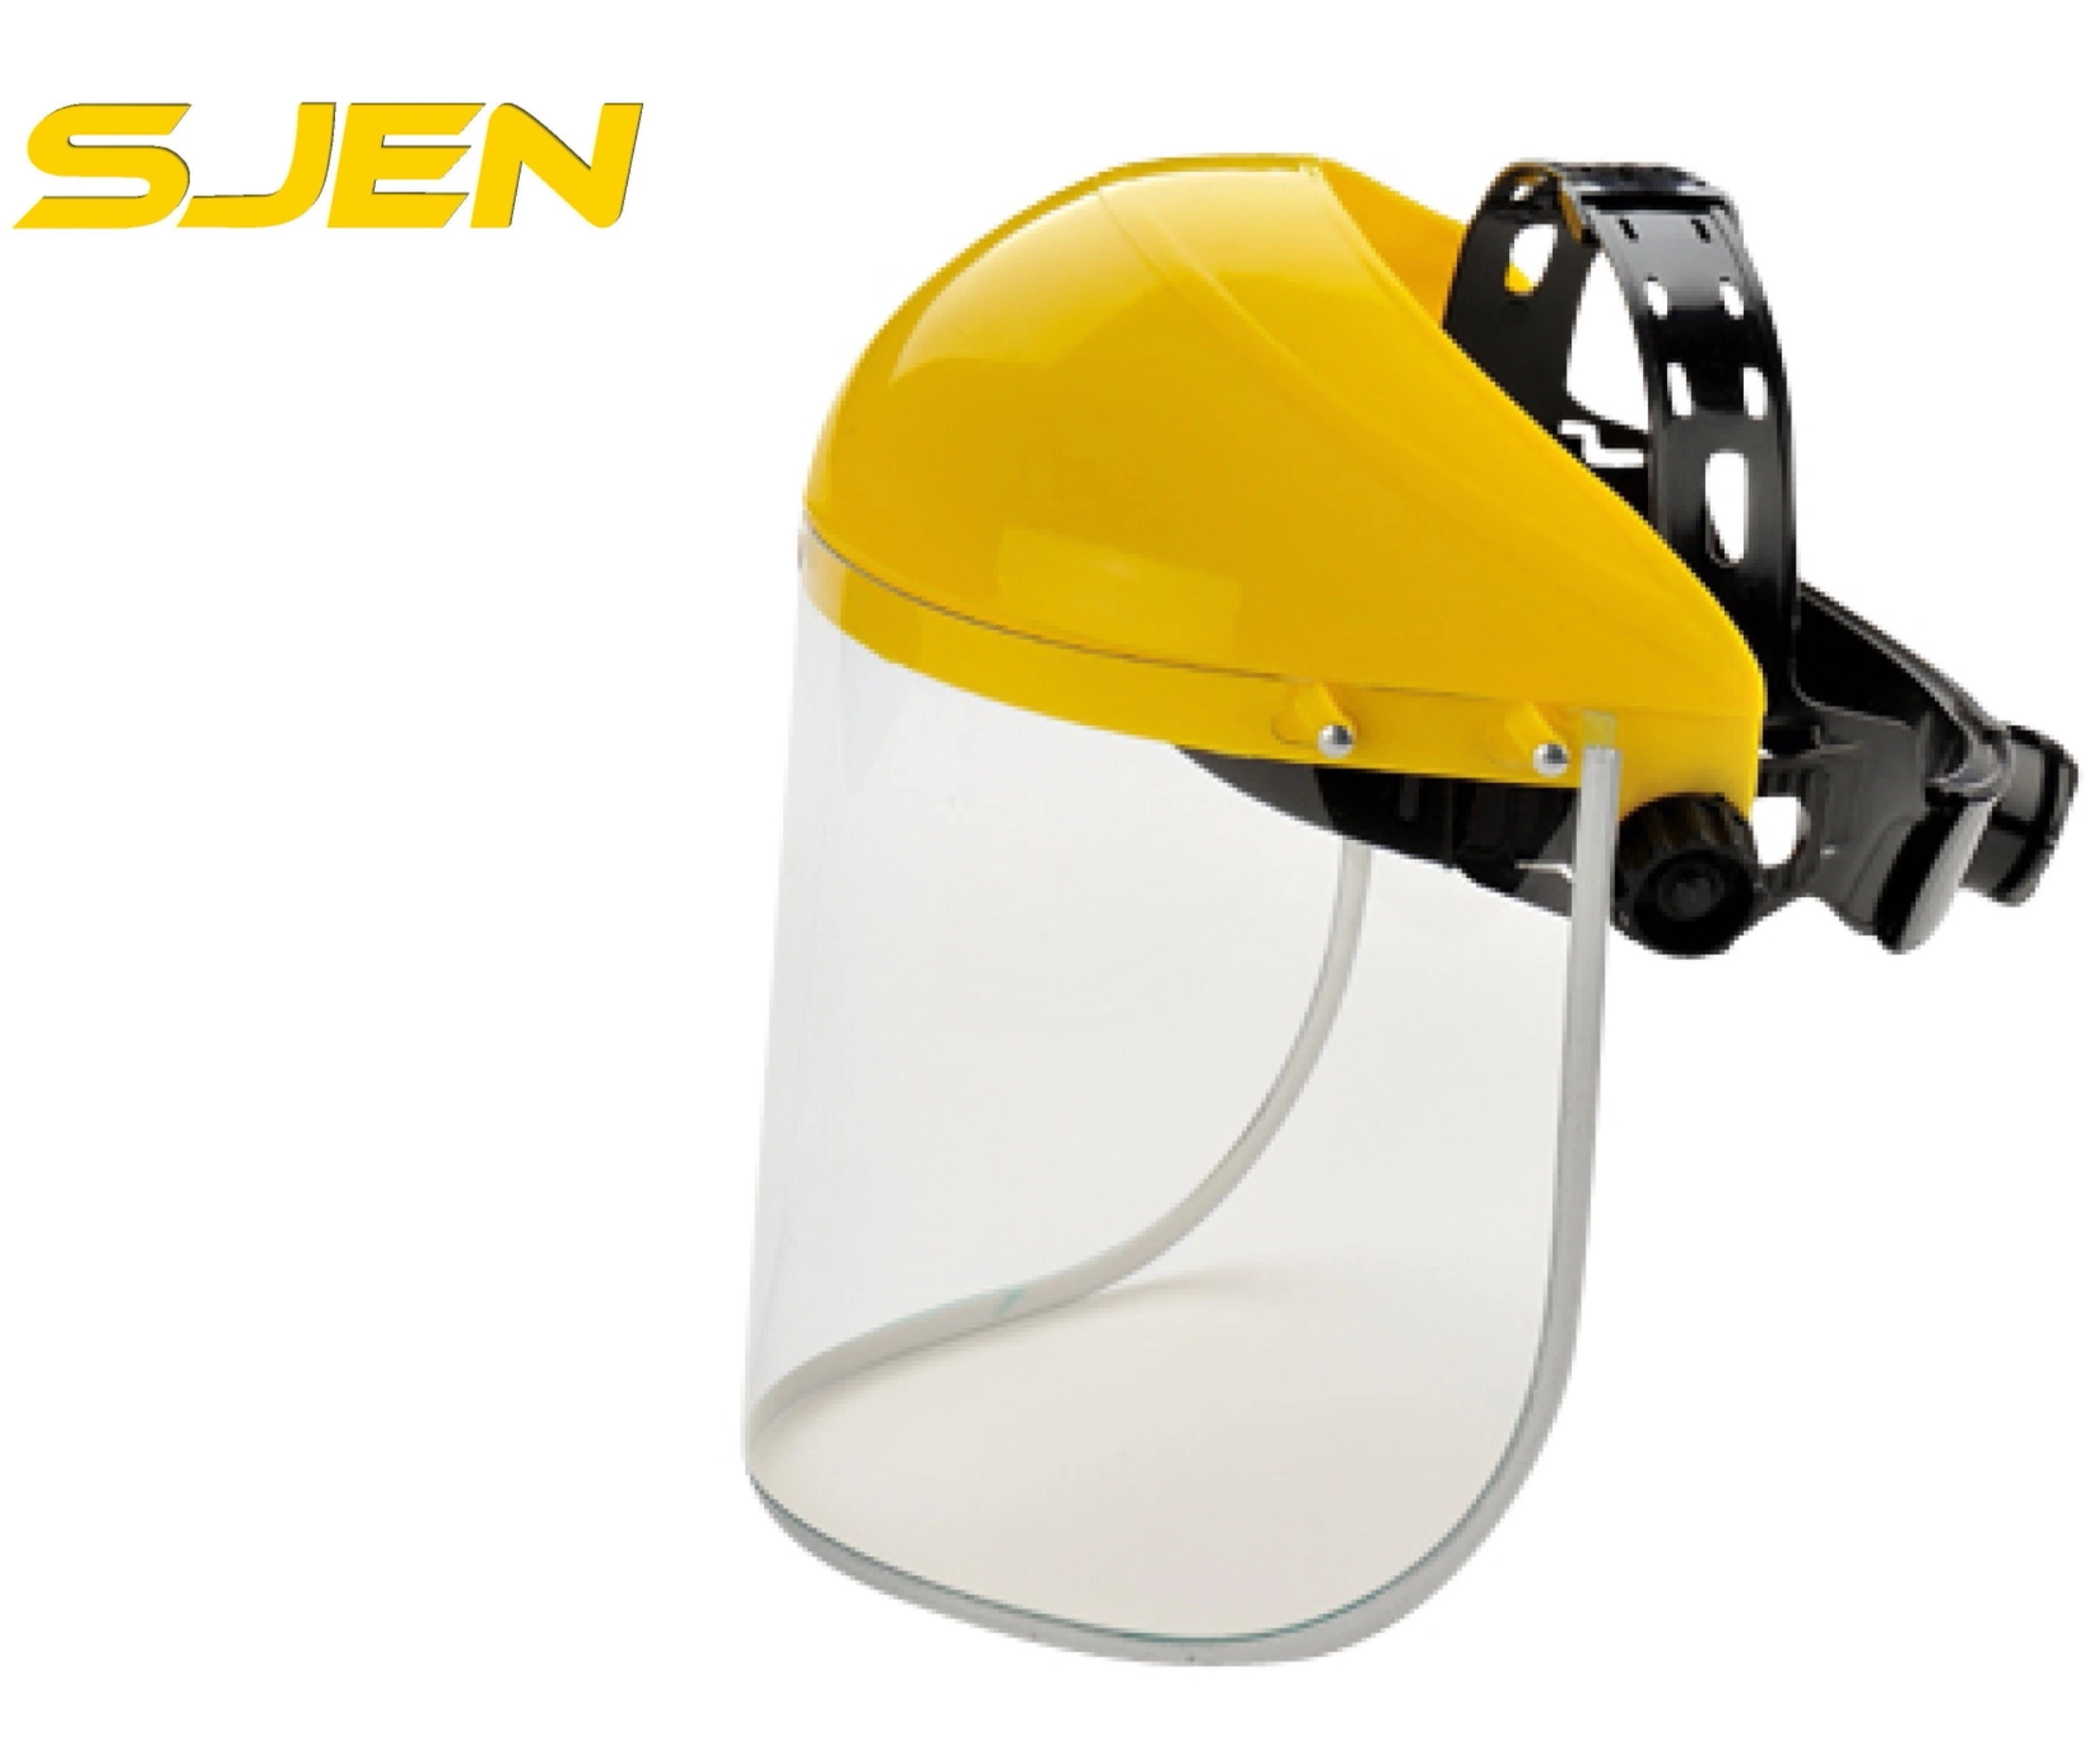 High Quality Personal Protective Equipment Safety Helmet with Facial Protection